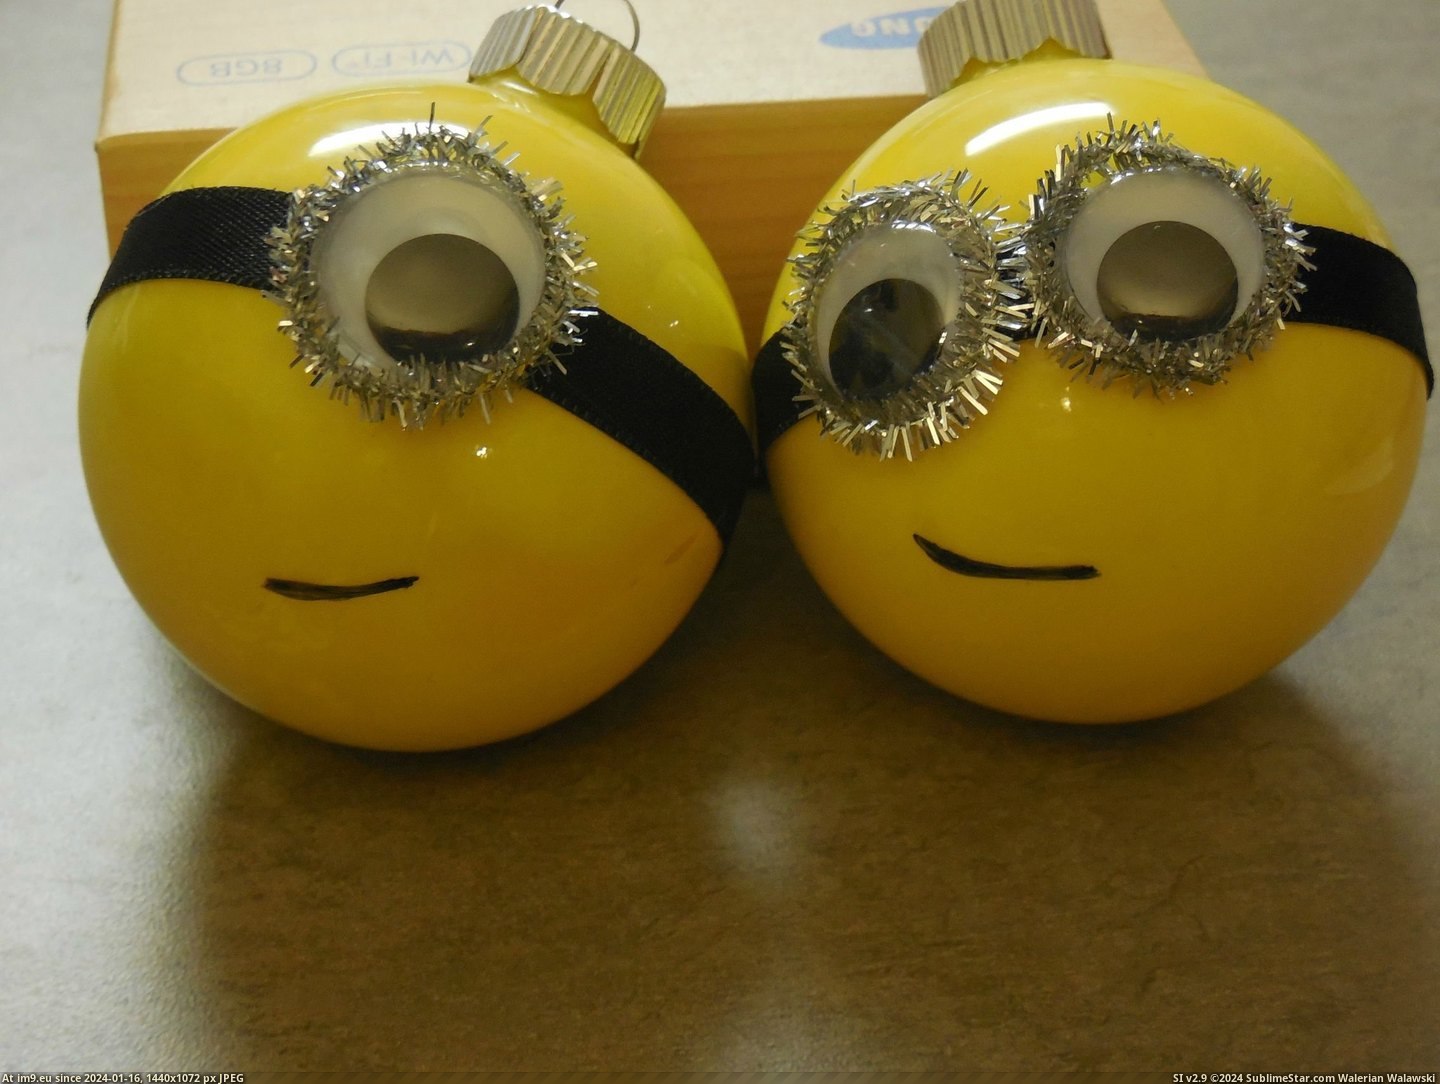 #For #Christmas #Him #Despicable #Minions #Husband #Loves [Pics] My husband LOVES the minions from Despicable Me, so I made him these for Christmas! Think he'll like them? Pic. (Image of album My r/PICS favs))